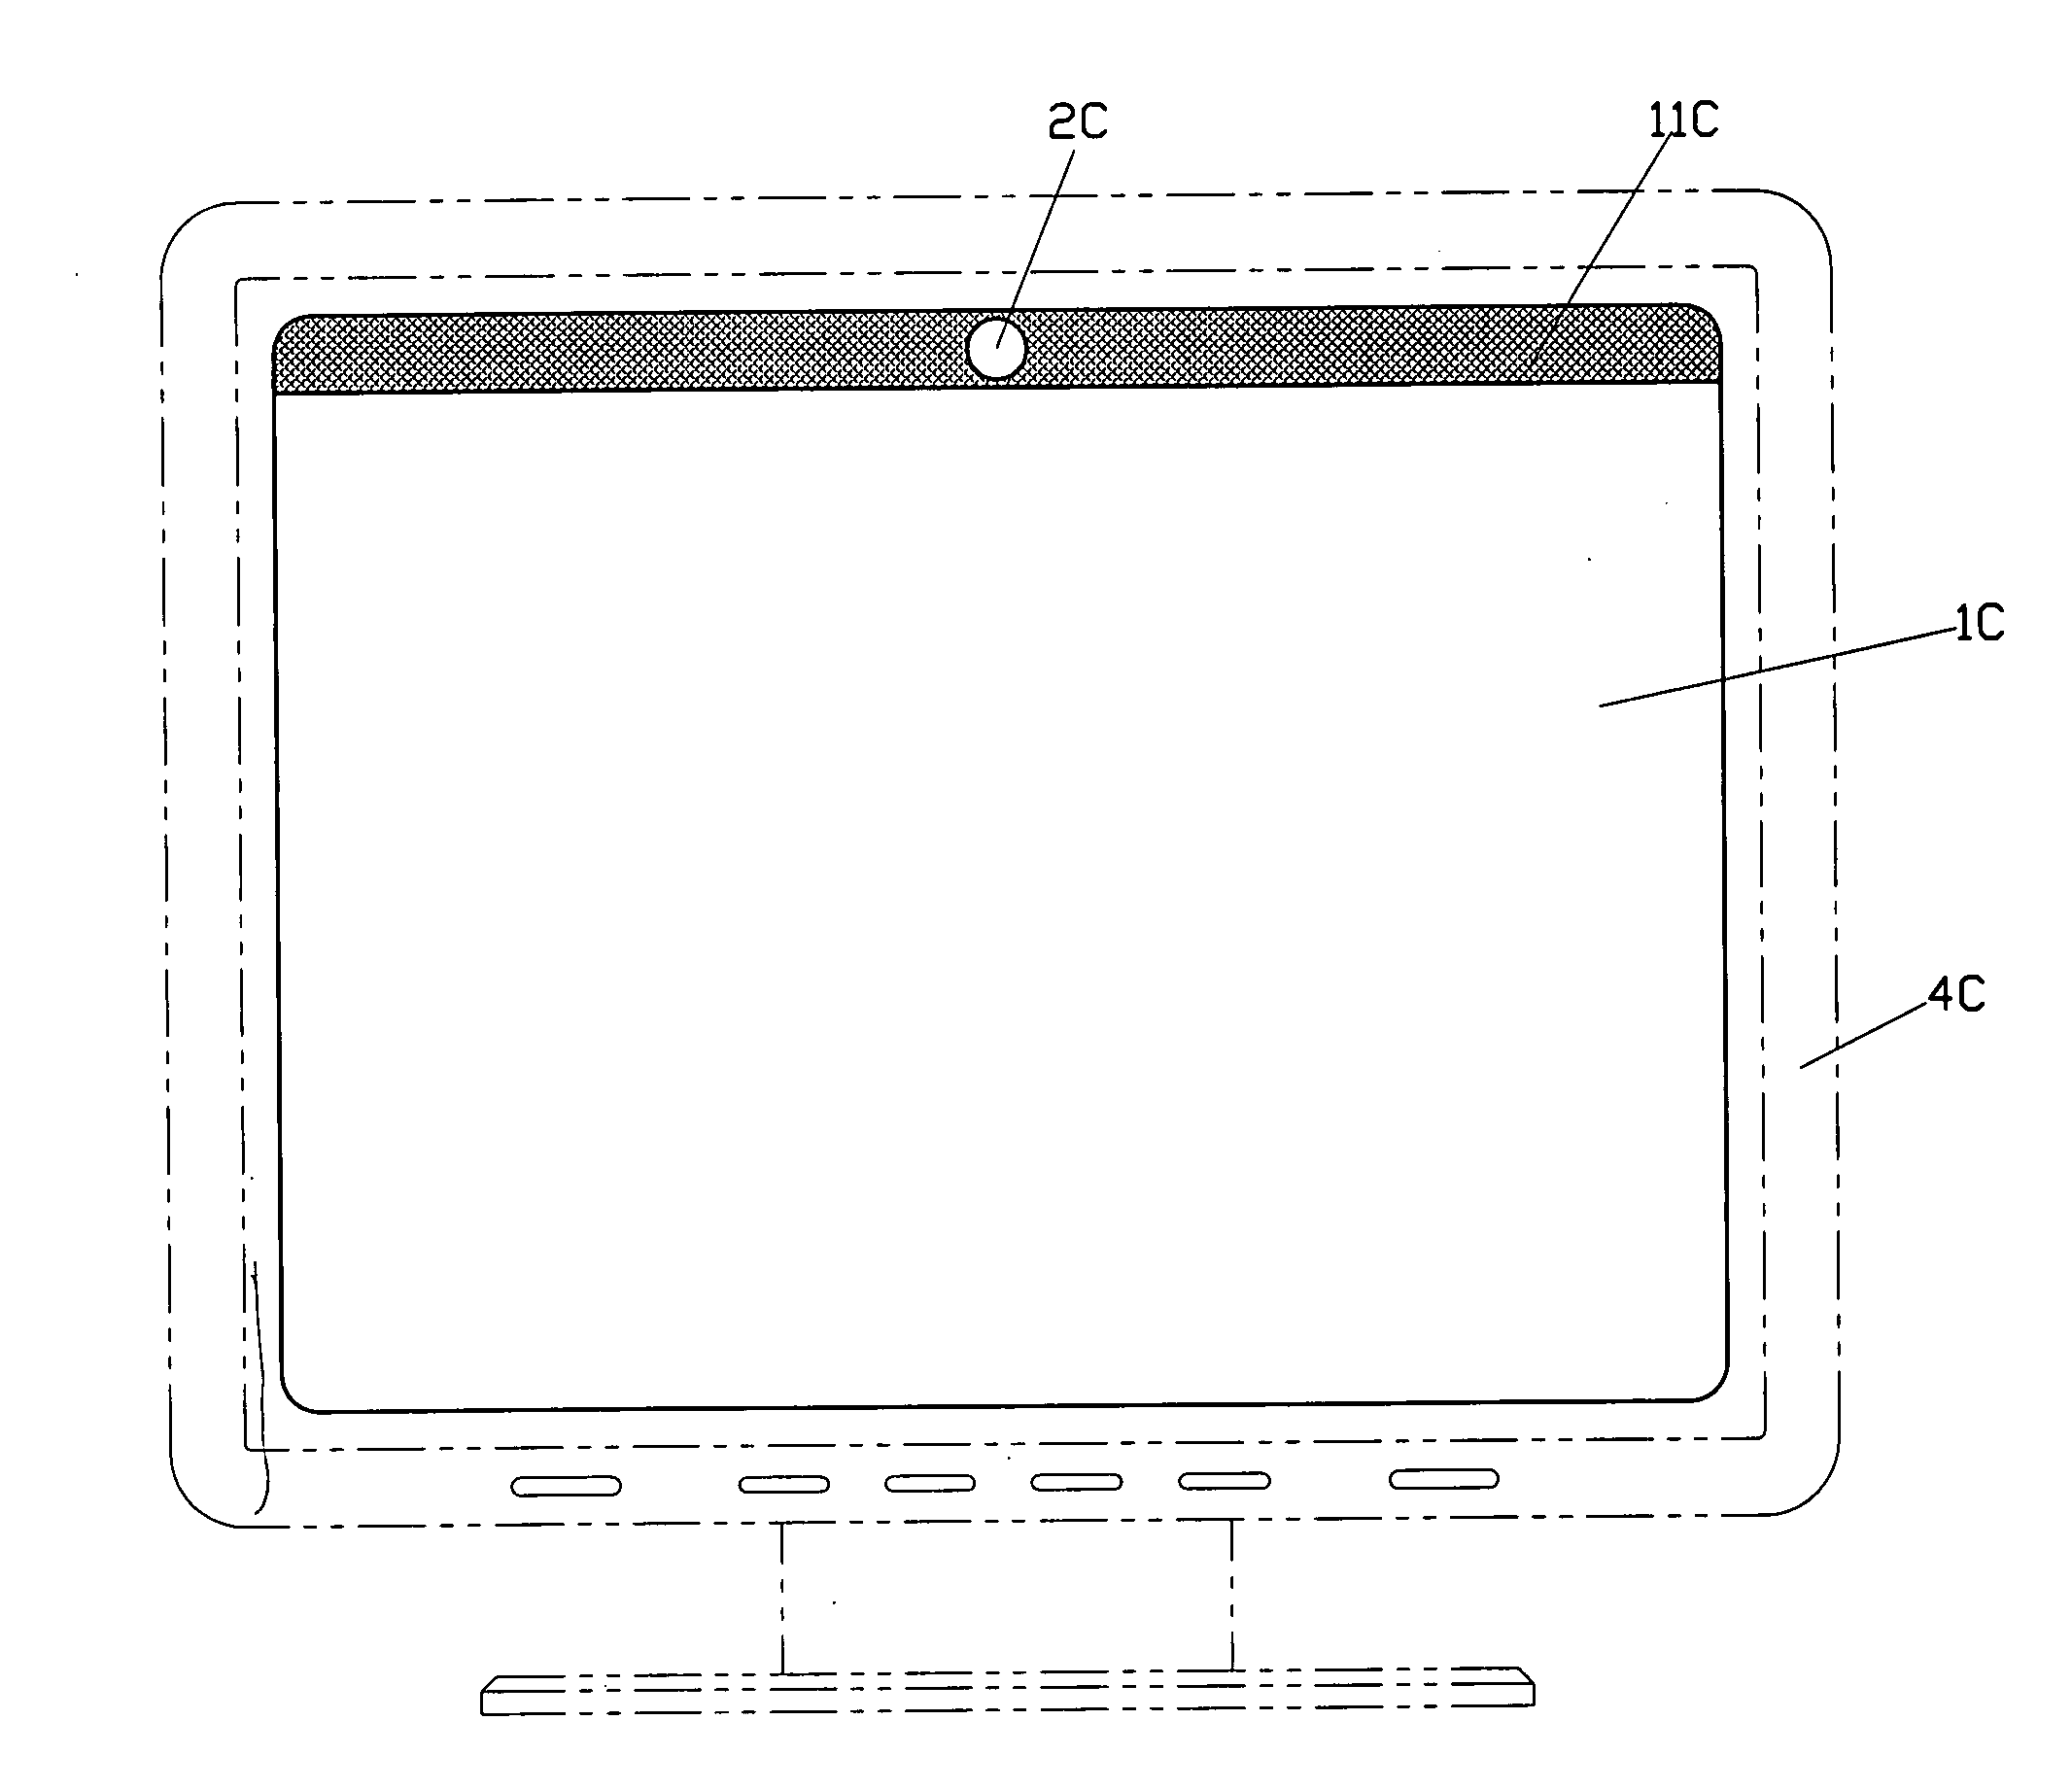 Display panel with camera function